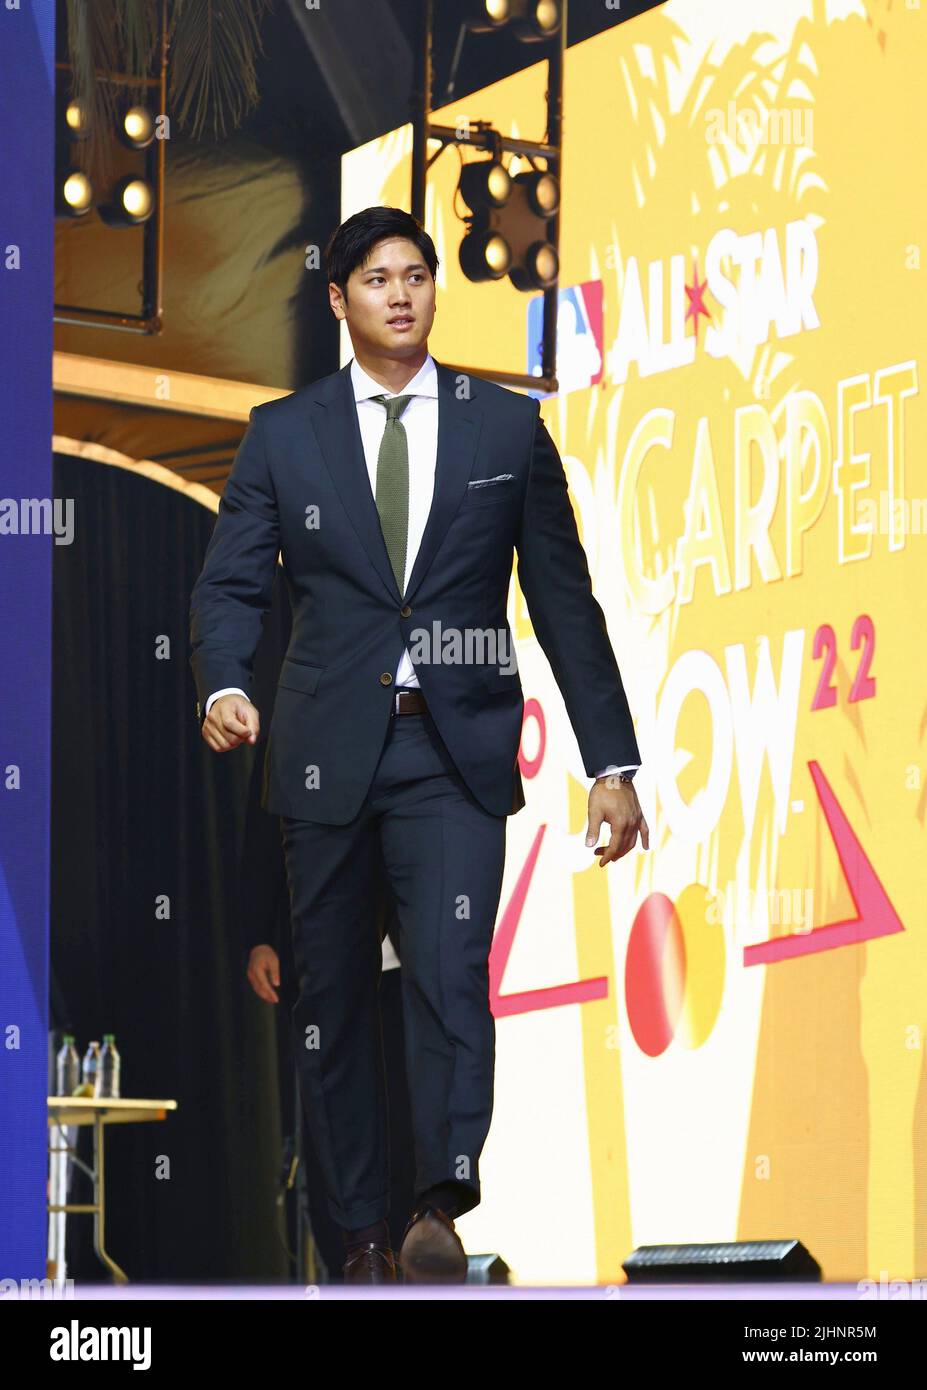 Dodger Stadium, Los Angeles, July 19, 2022, Los Angeles Angels two-way  player Shohei Ohtani appears in the Red Carpet Show before the MLB All-Star  baseball game on July 19, 2022, at Dodger